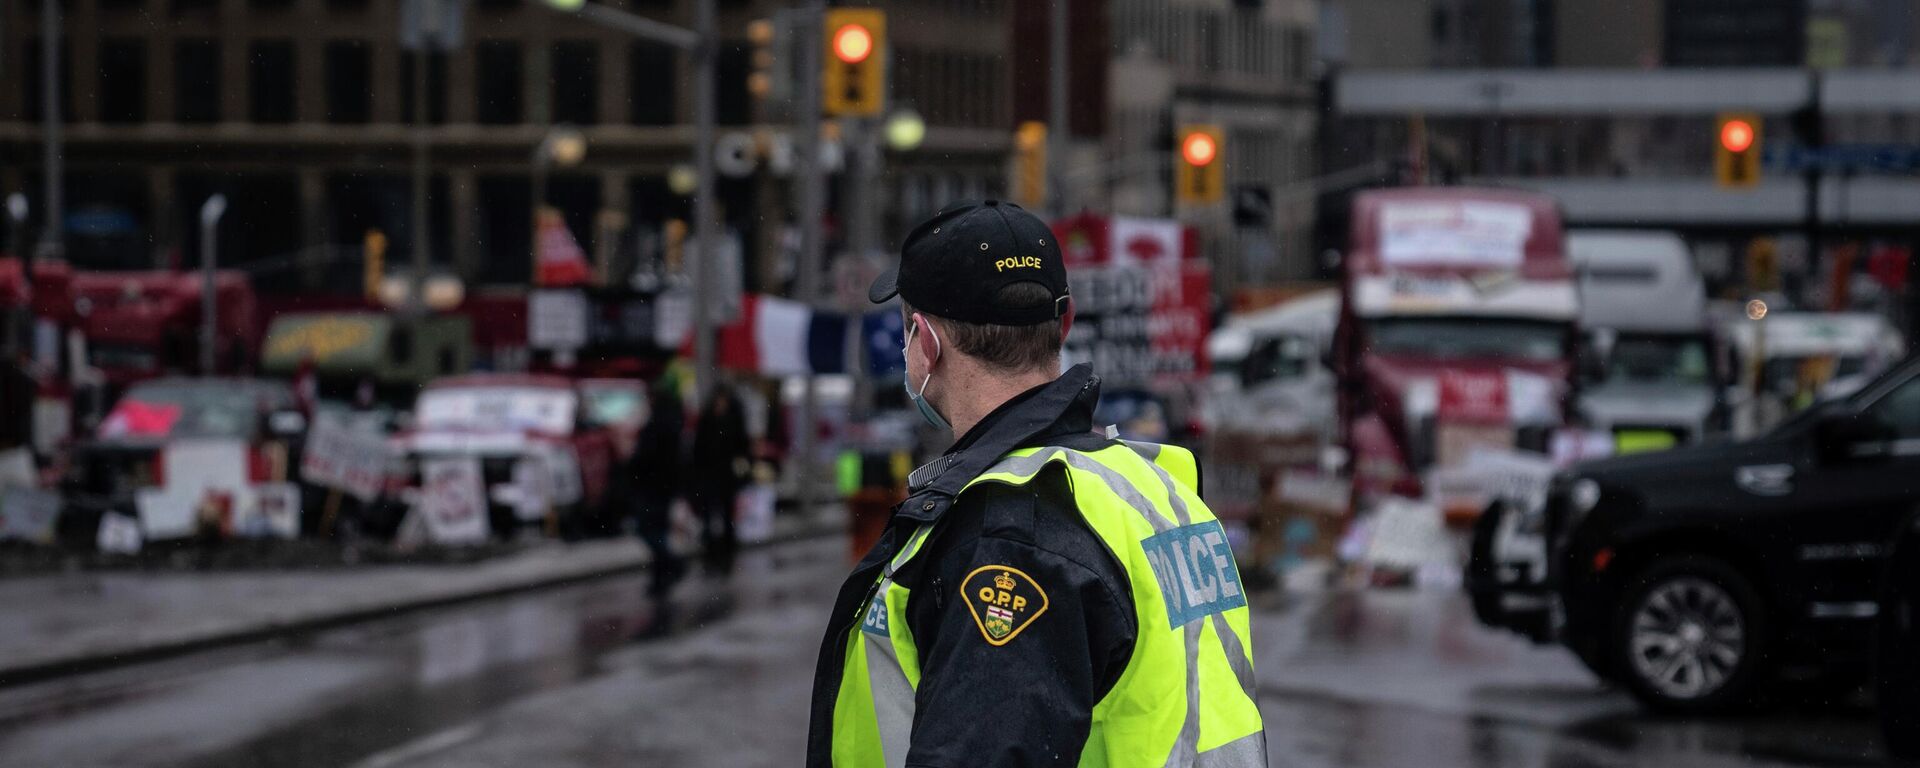 An Ontario Provincial Police officer walks in front of a row of trucks parked on the street near the Canadian parliament building in Ottawa on Thursday, Feb. 17, 2022. Hundreds of truckers clogging the streets of Canada's capital city in a protest against COVID-19 restrictions are bracing for a possible police crackdown. (AP Photo/Robert Bumsted) - Sputnik India, 1920, 21.09.2023